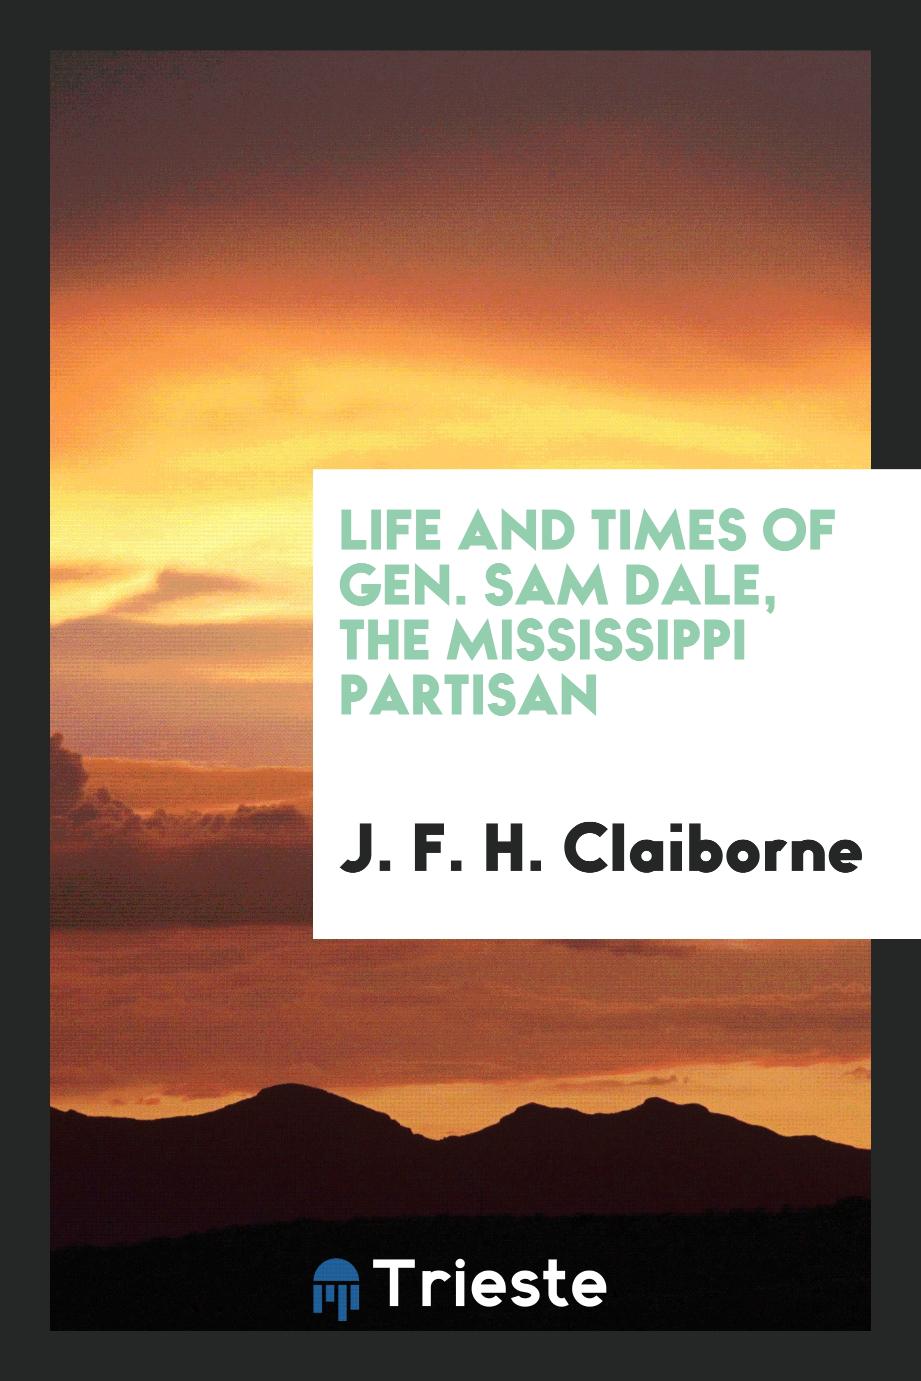 J. F. H. Claiborne - Life and times of Gen. Sam Dale, the Mississippi partisan